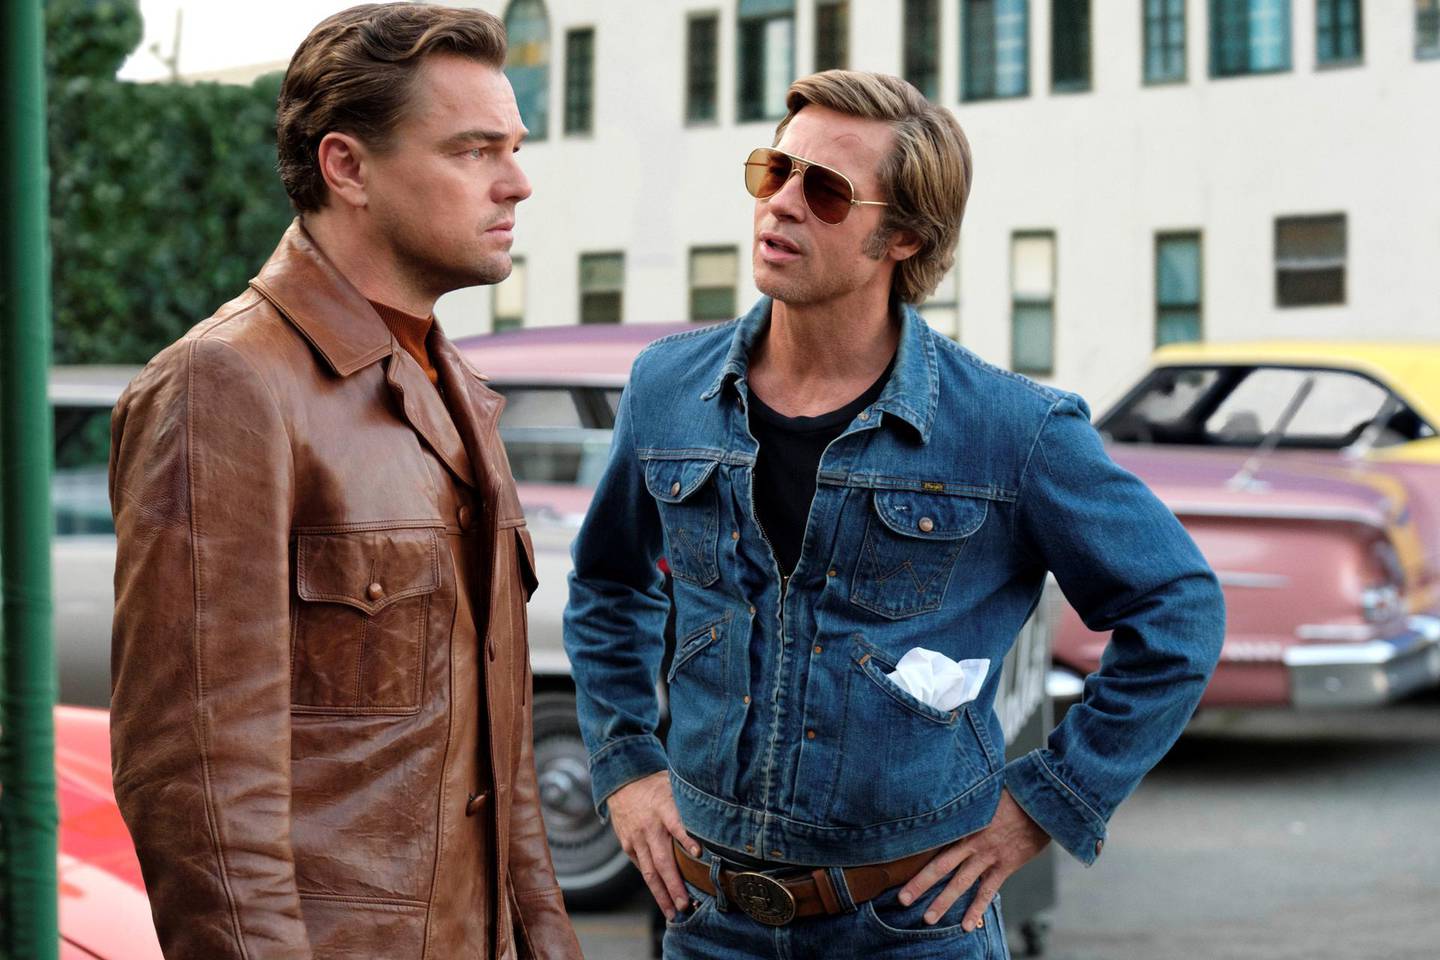 Leonardo DiCaprio and Brad Pitt star in ONCE UPON TIME IN HOLLYWOOD.